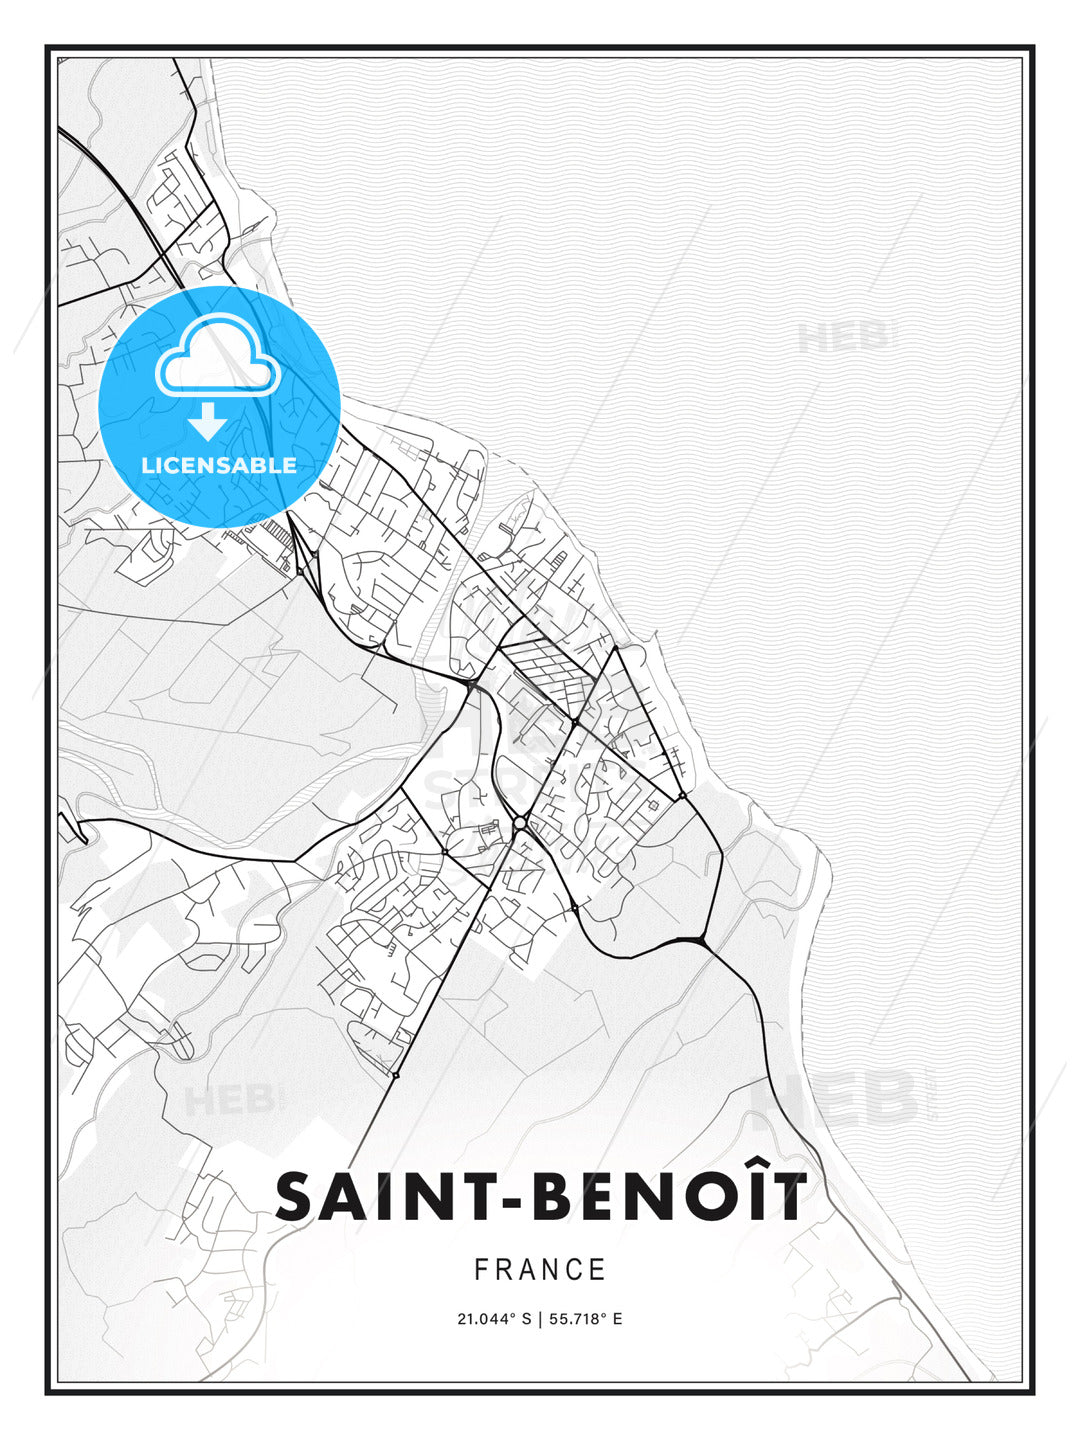 Saint-Benoît, France, Modern Print Template in Various Formats - HEBSTREITS Sketches